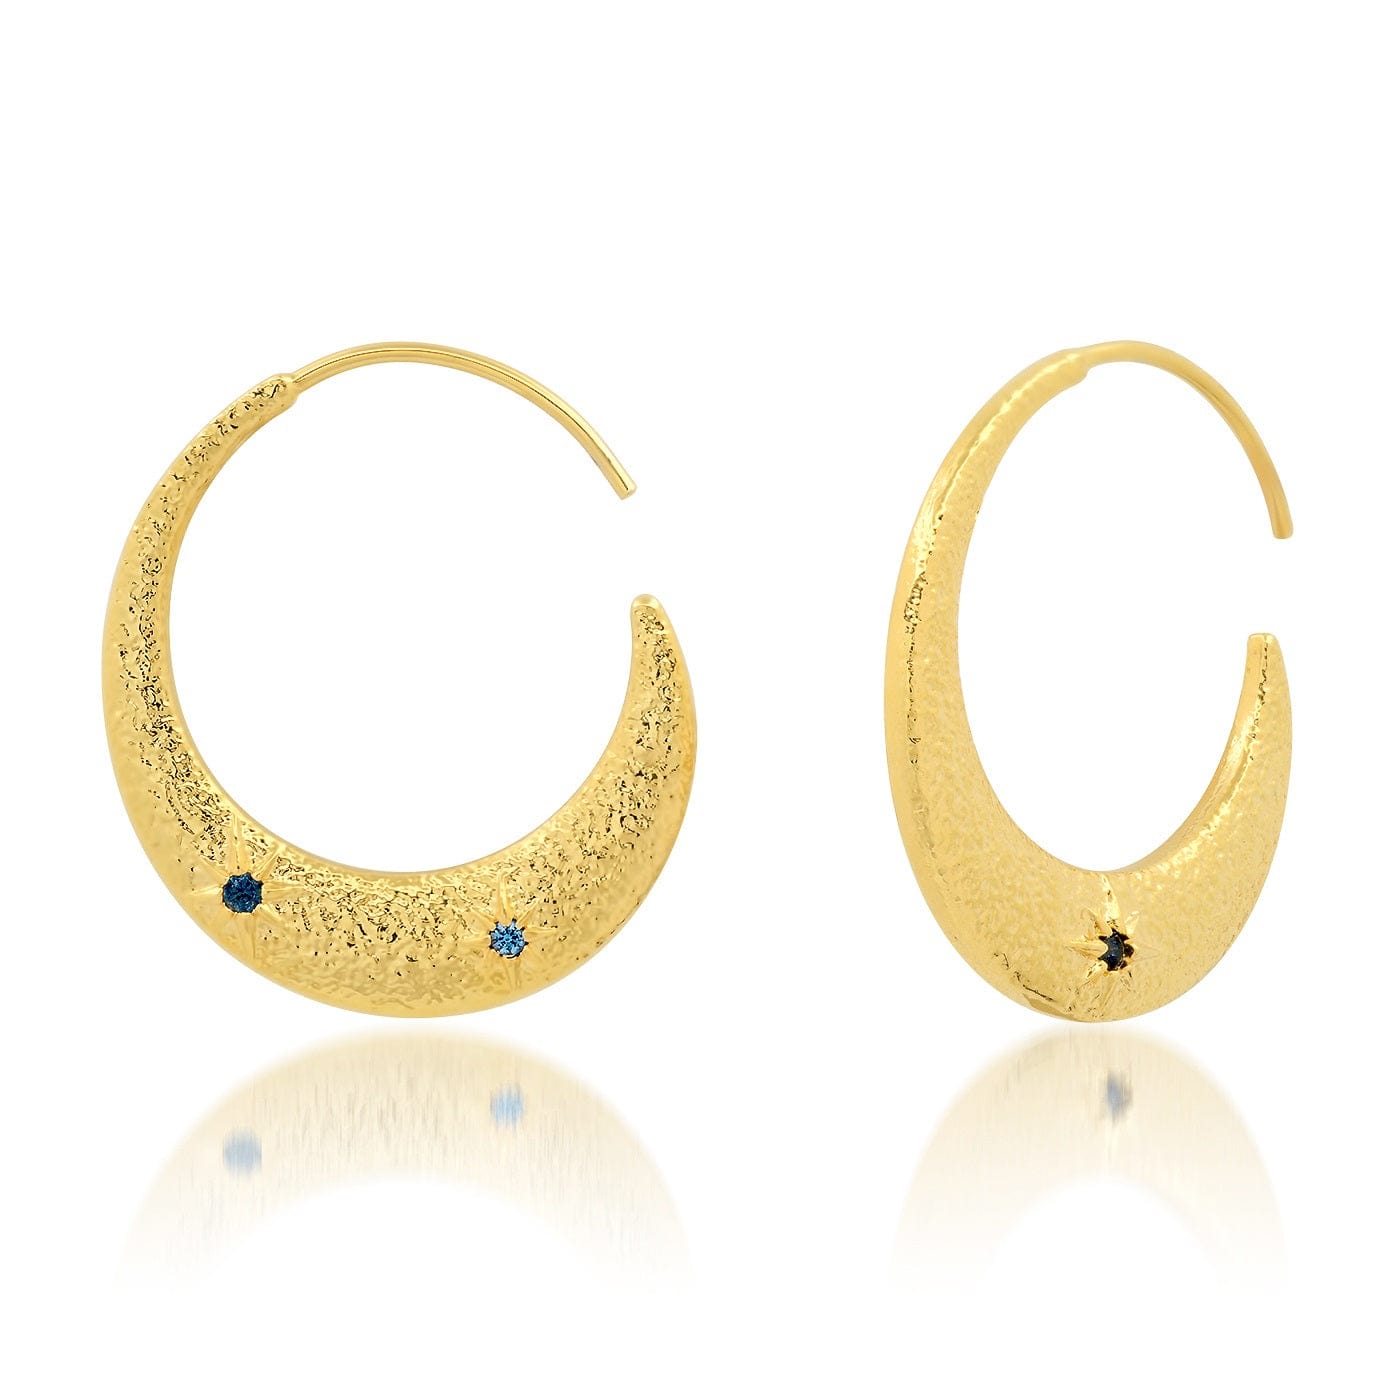 TAI JEWELRY Earrings Hammered Gold Crescent Hoop